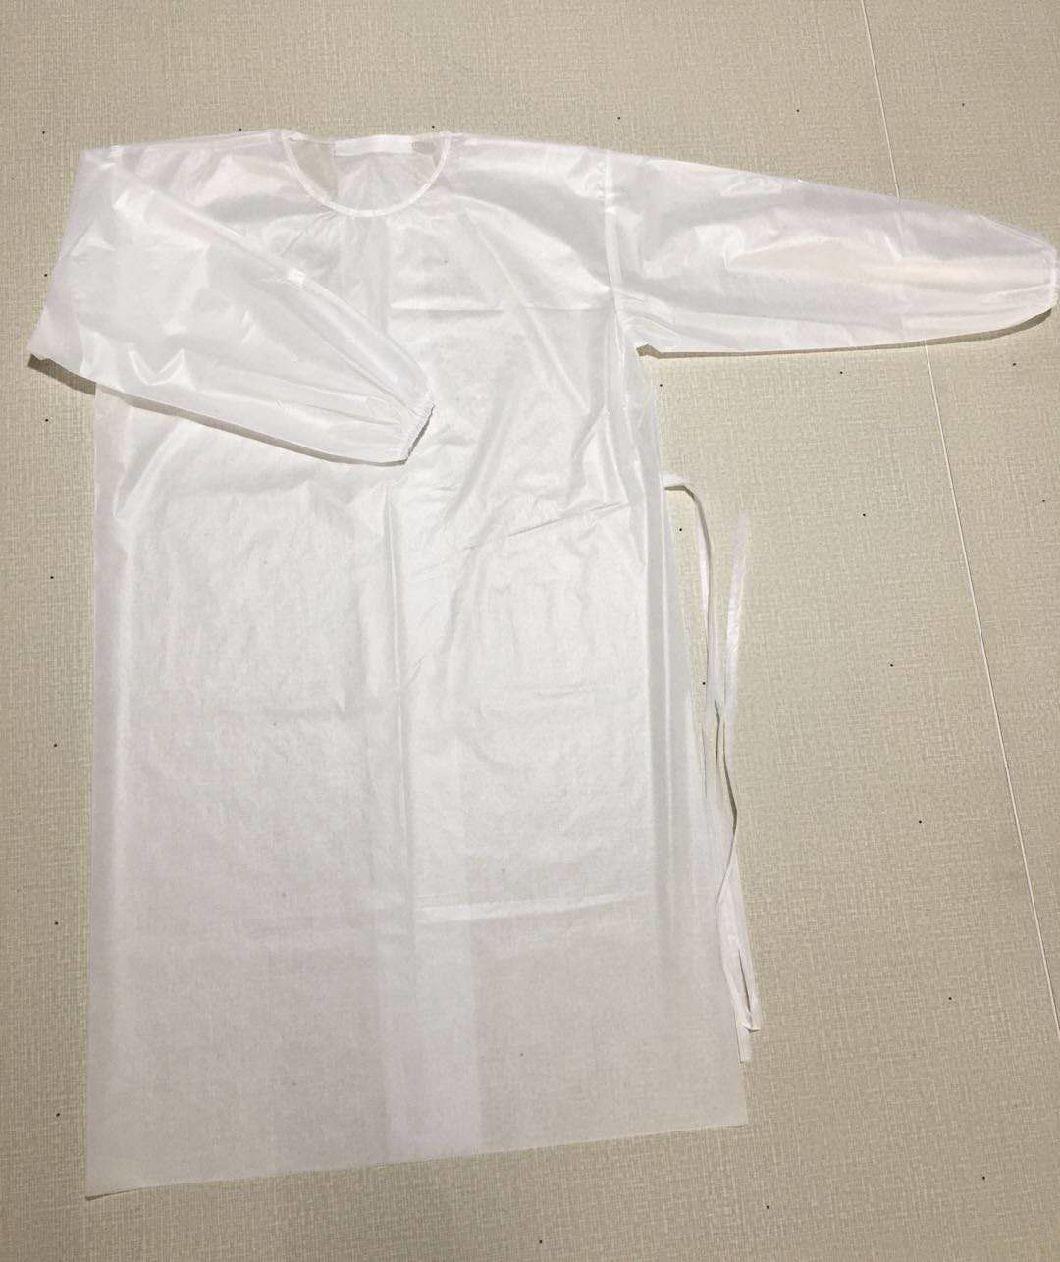 Disposalbe Isolation Gown (SS Non-woven PE coated, 40GSM) (NON MEDICAL)